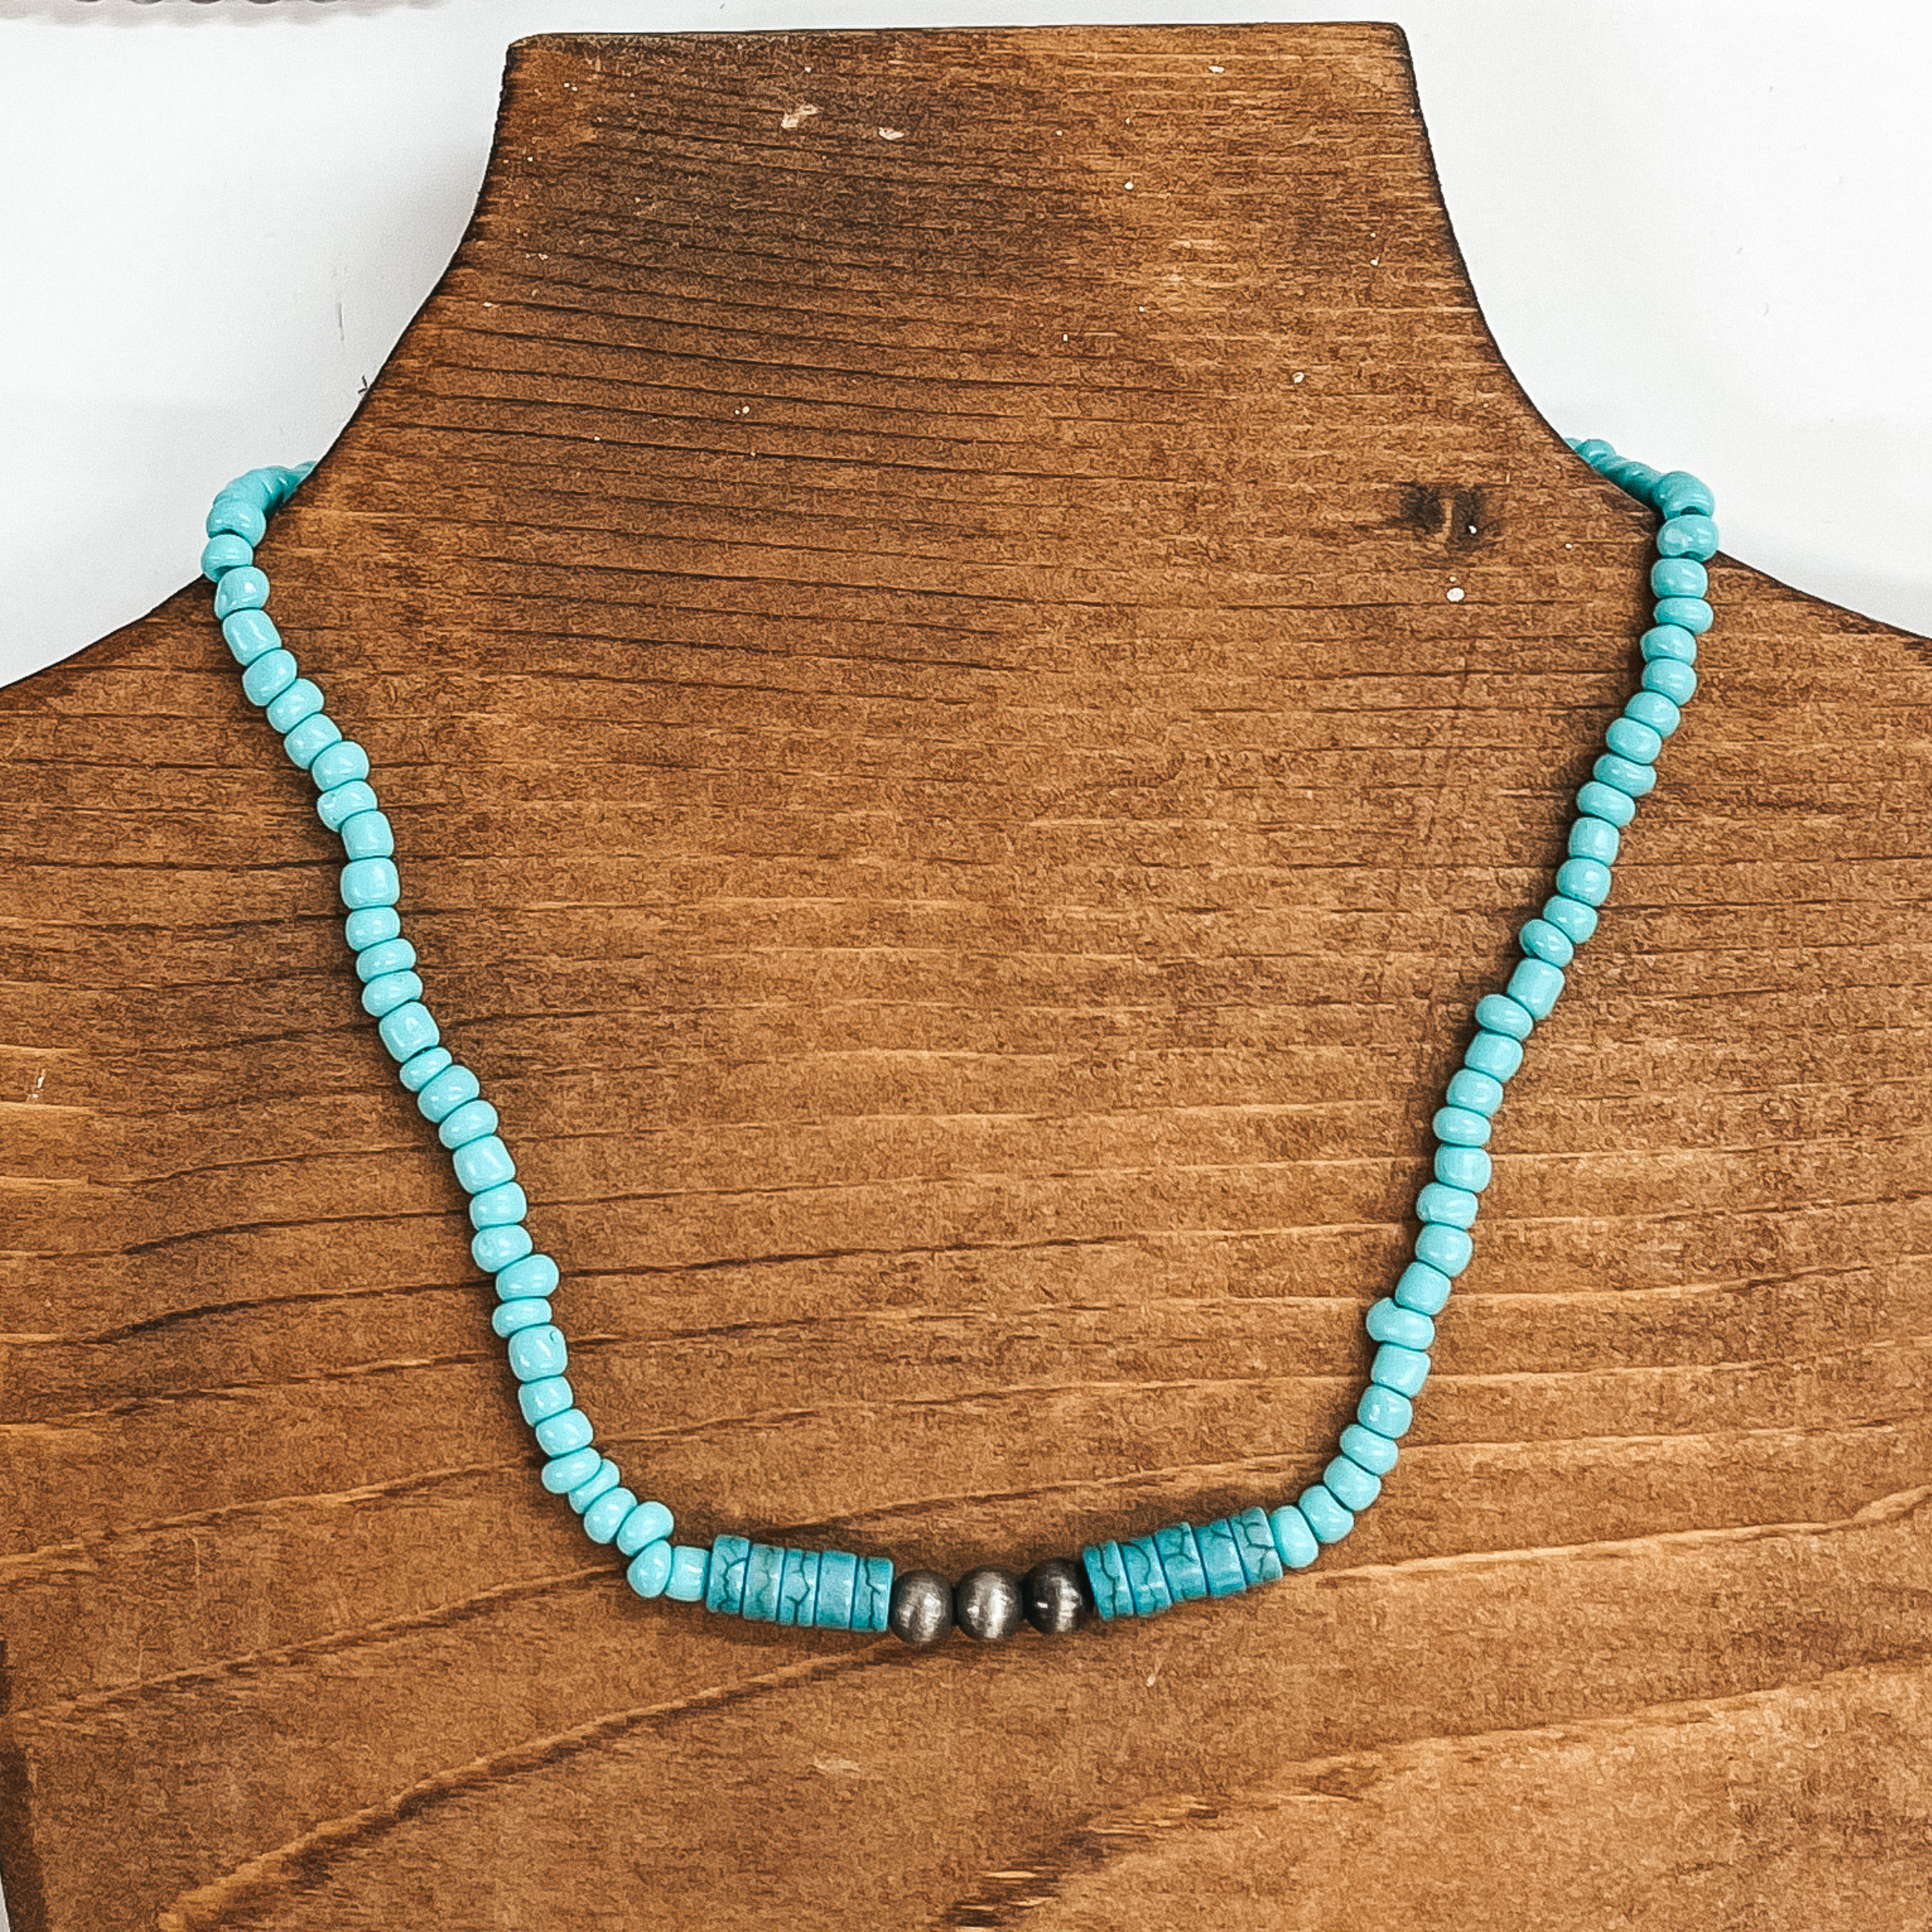 Feeling Free Turquoise and Teal Beaded Choker Necklace with Three Faux Navajo Beads in Silver Tone - Giddy Up Glamour Boutique